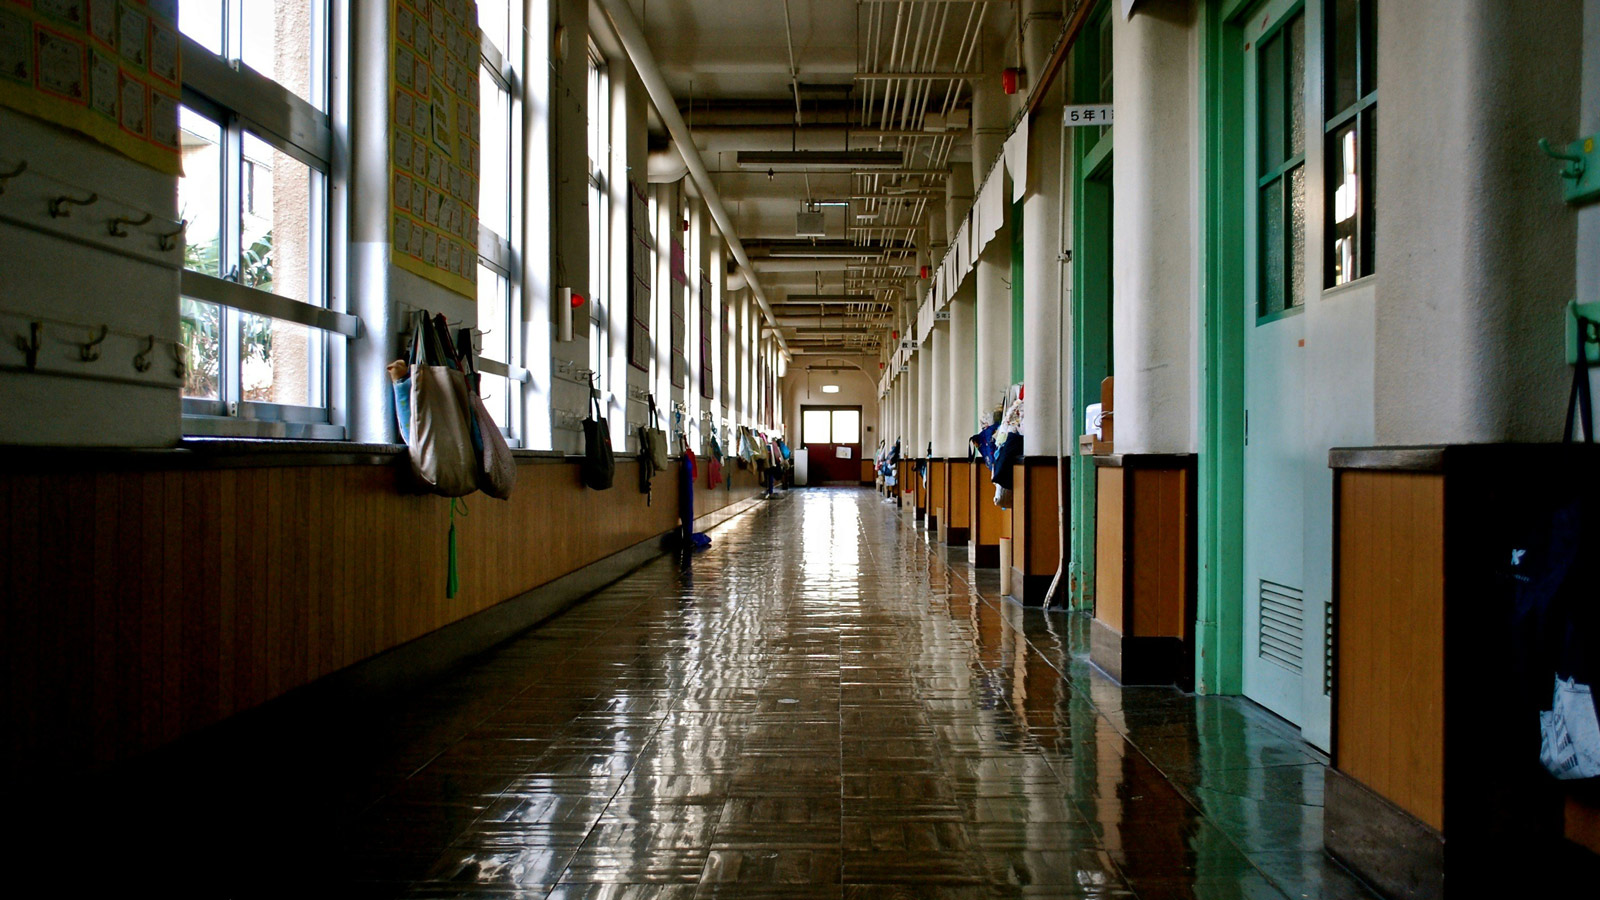 An empty school hallway; one one side of the hall, a long row of windows and hooks holding backpacks, and on the other, a row of classroom doors.